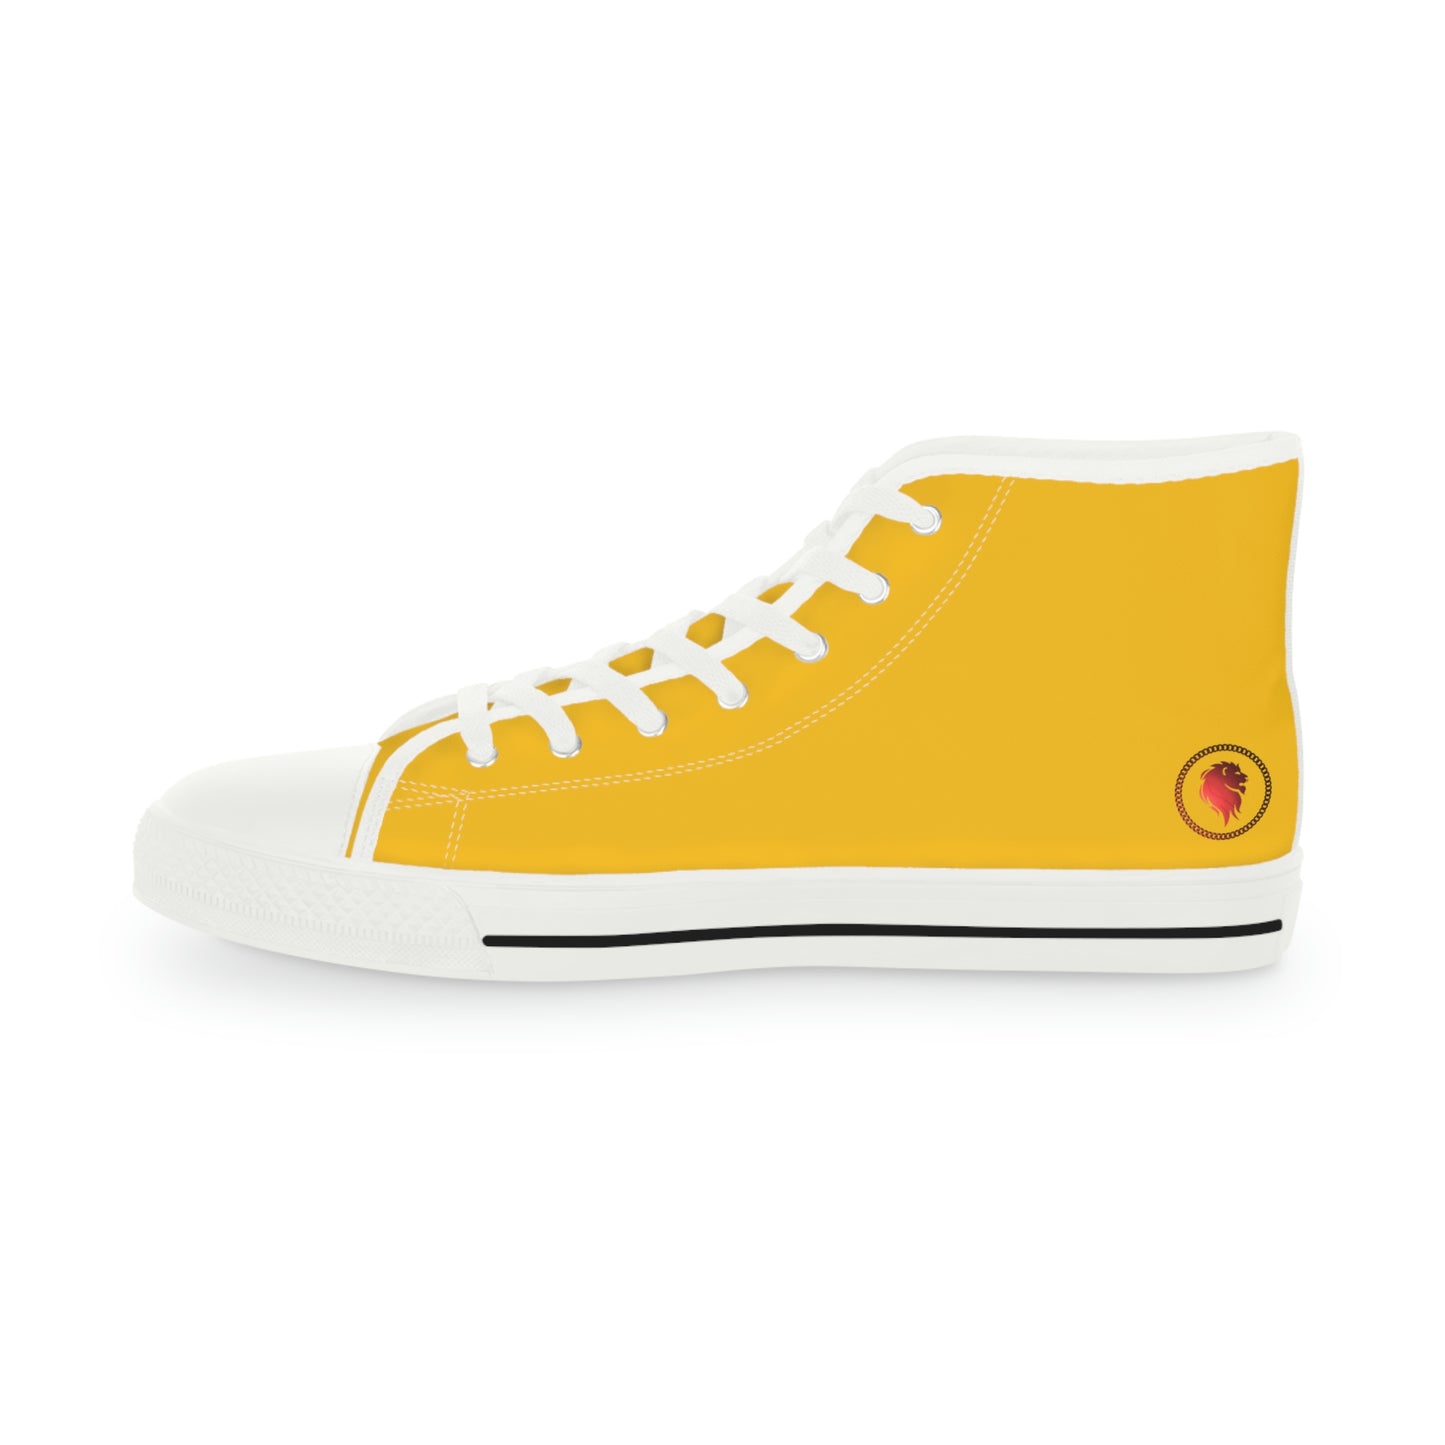 Red on Yellow, High Top Sneakers